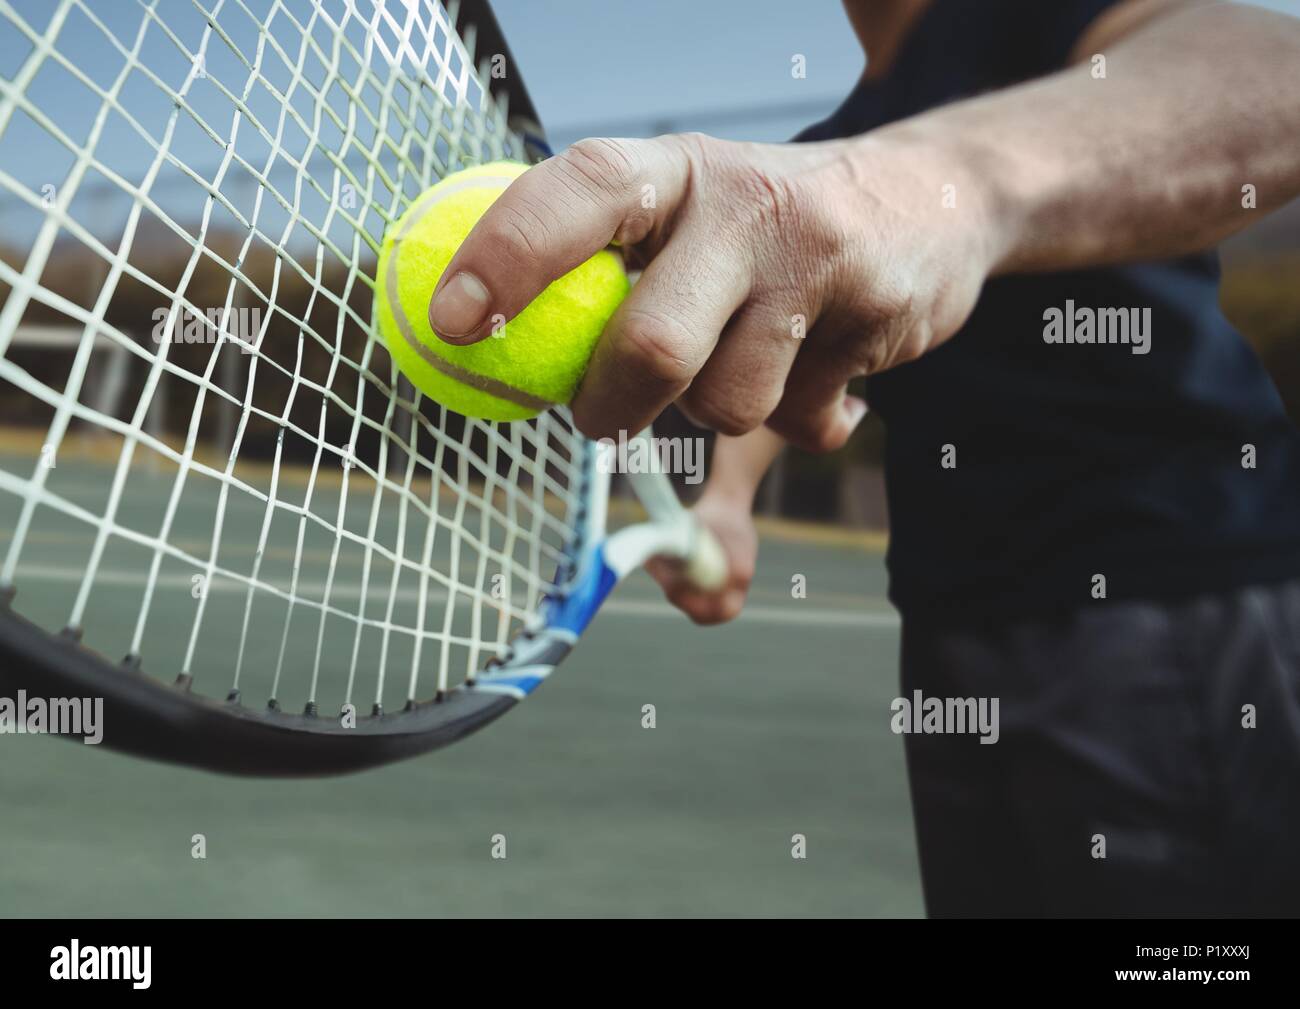 Tennis player holding racket on court with racket Stock Photo